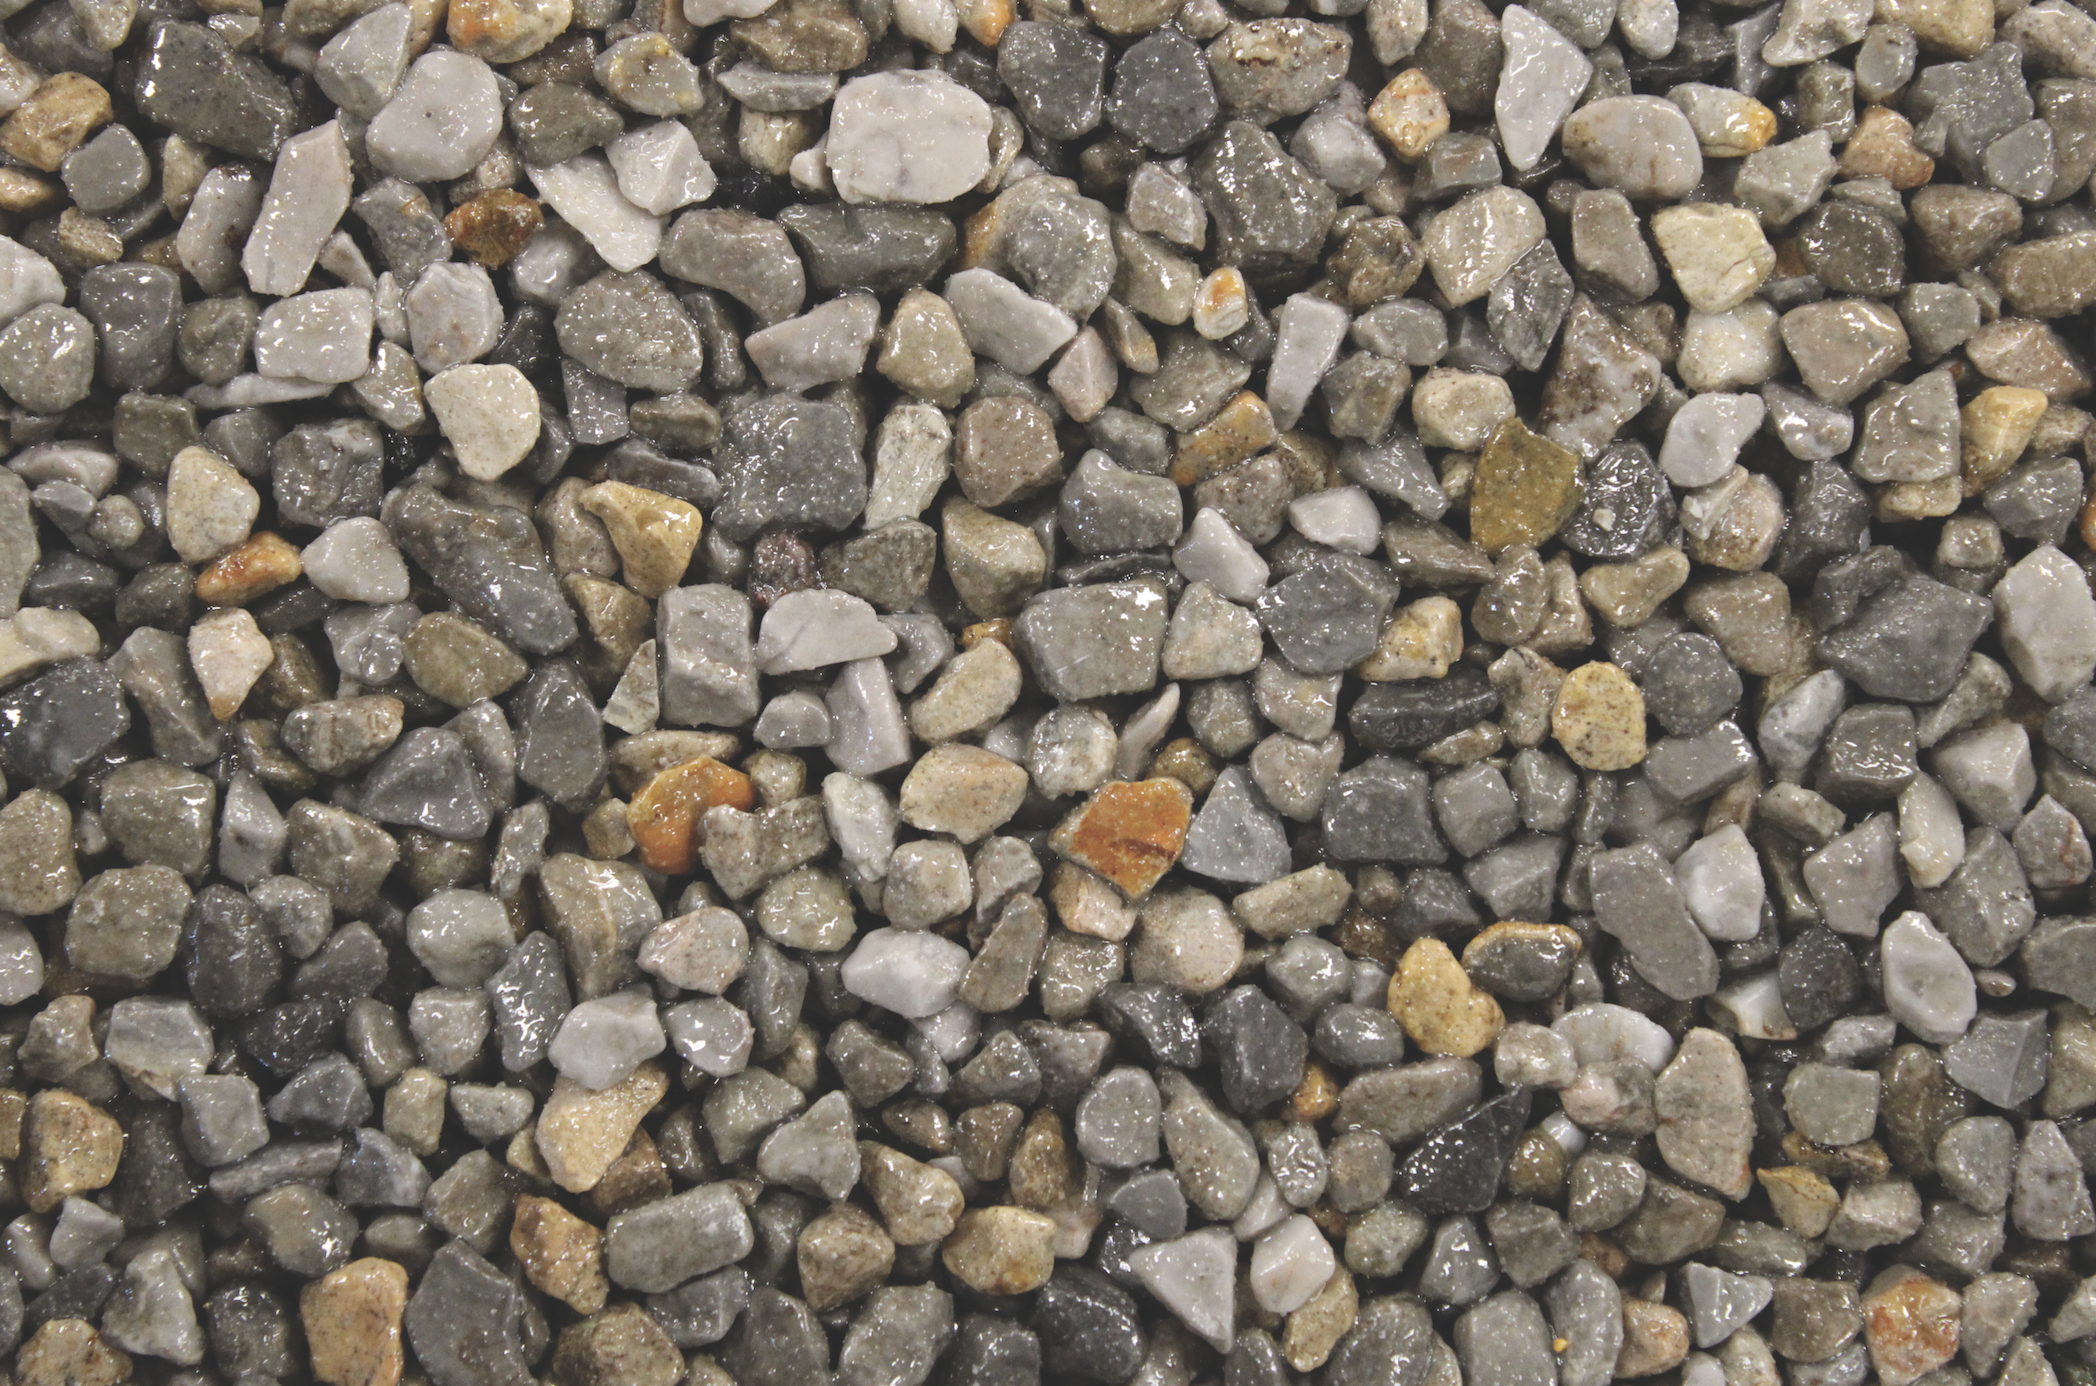 By blending differing natural stone aggregates together AceBound UVR surfacing offers almost unlimited colors.